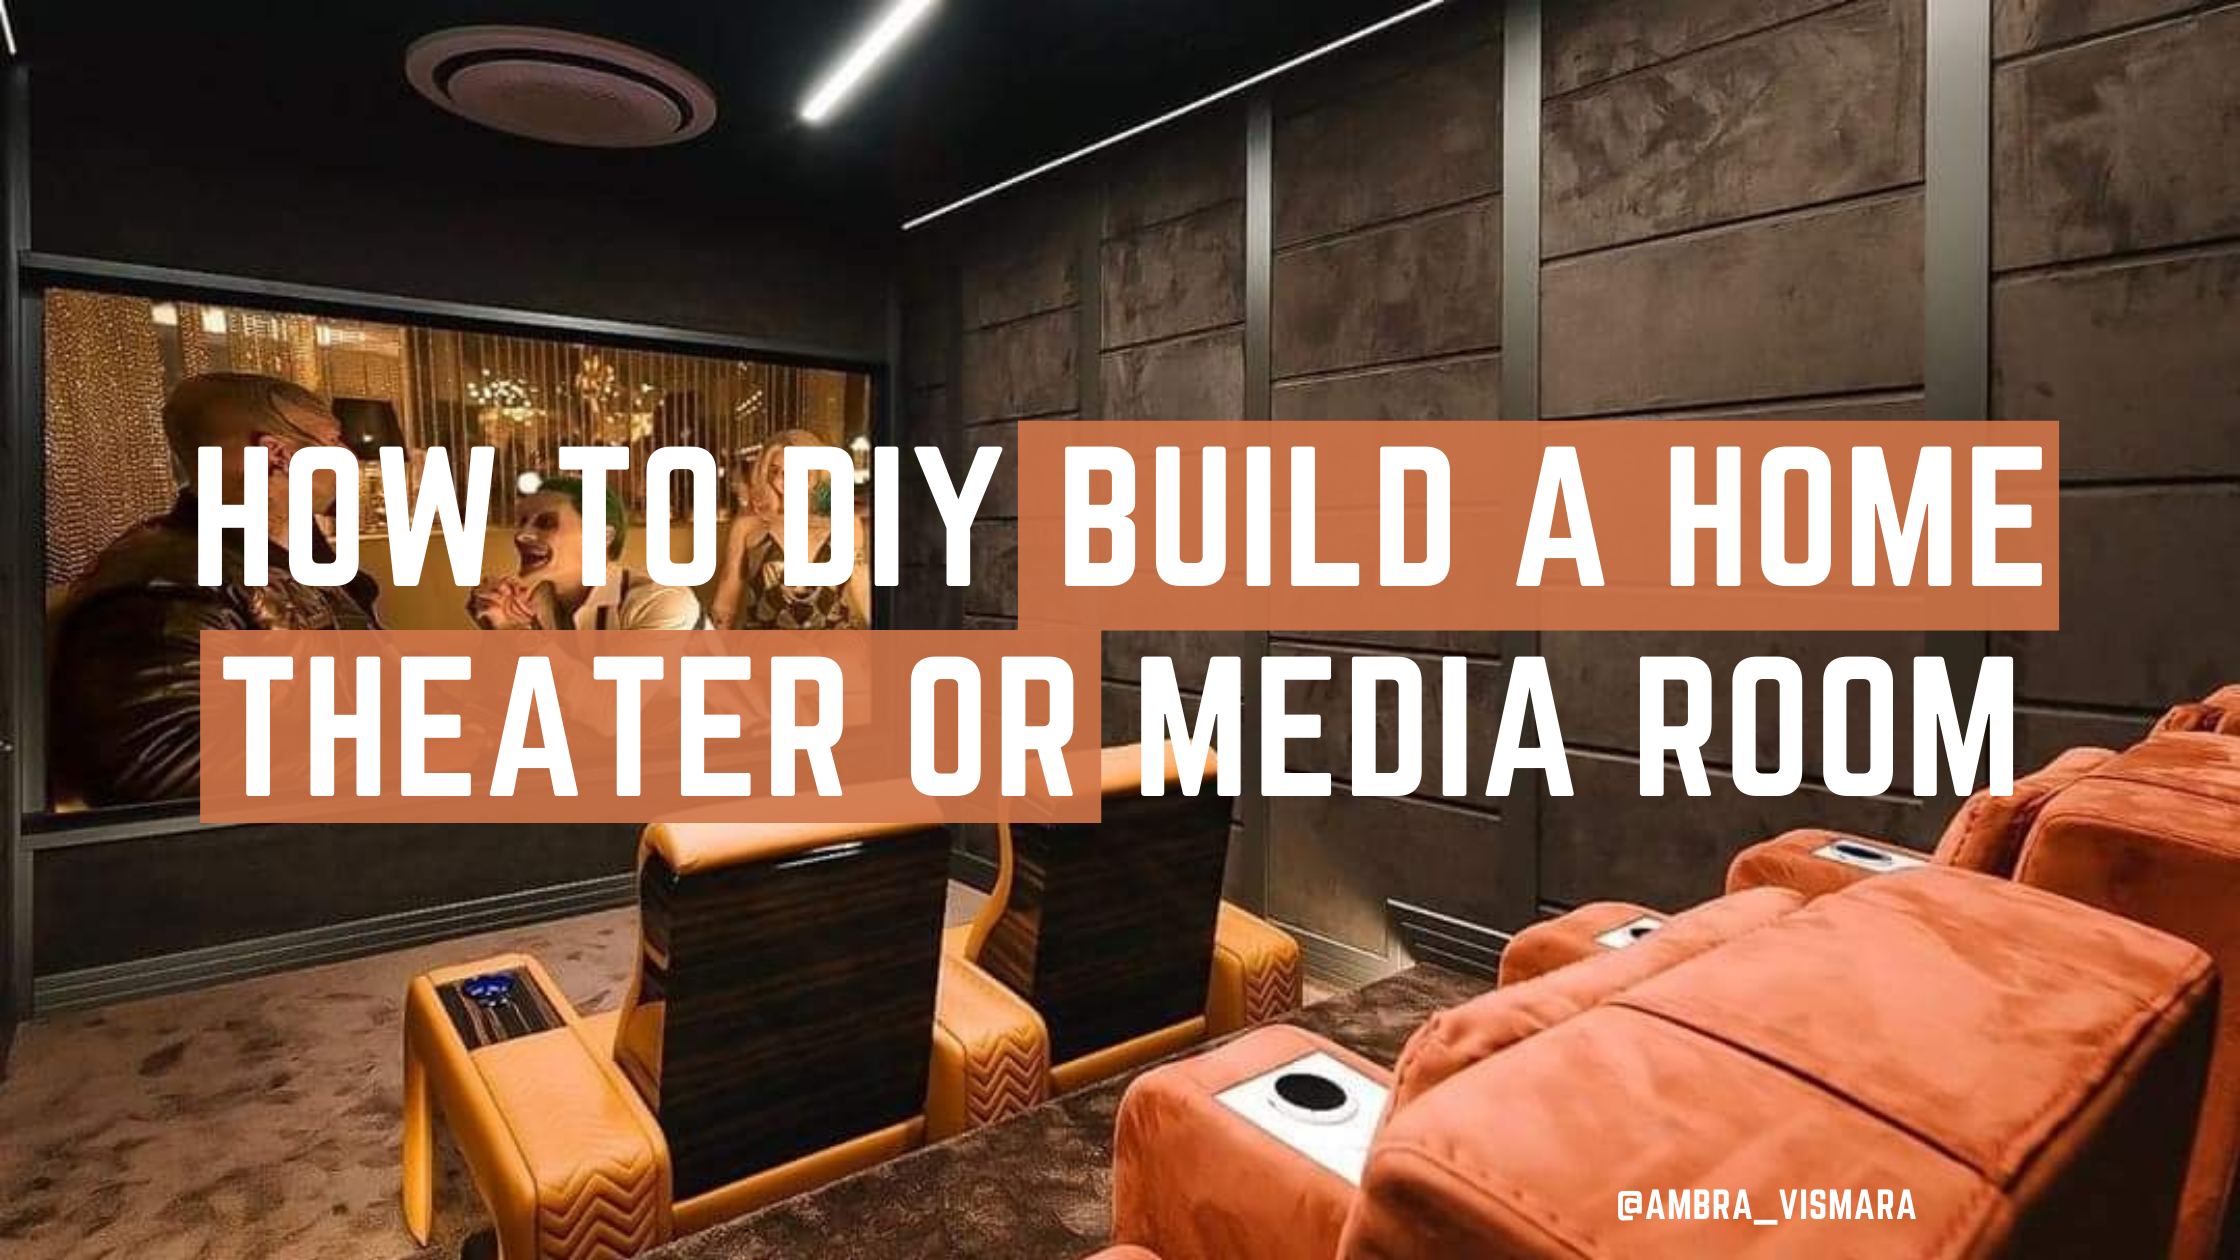 HtMart Design Guide #1: How To Build A Home Theater